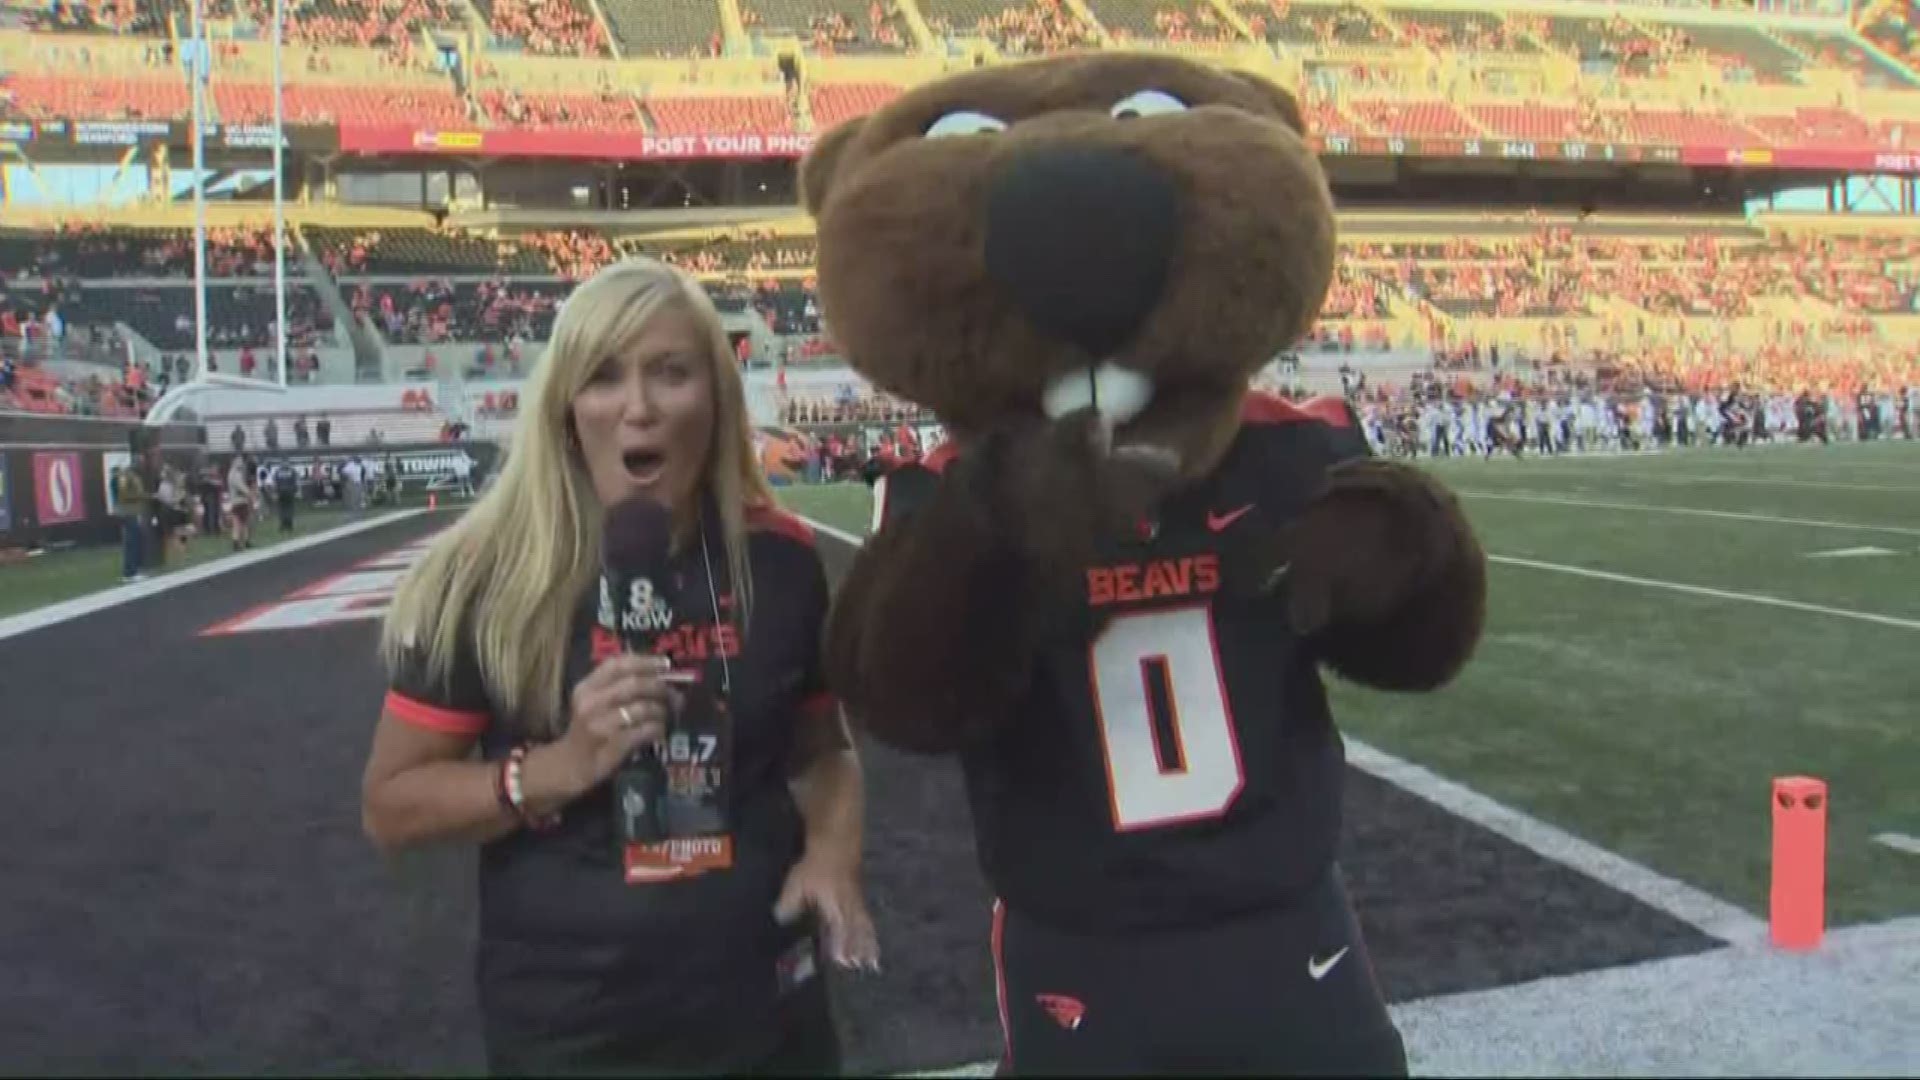 Benny the Beaver is ready for Oregon State University to take on Oklahoma State Festival for the first time.
#TonightwithCassidy